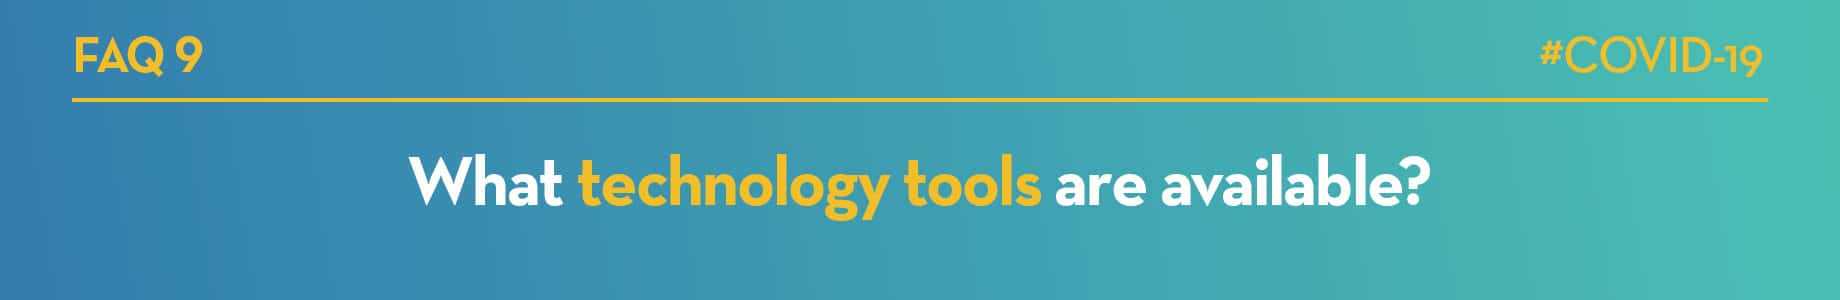 What technology tools are available?